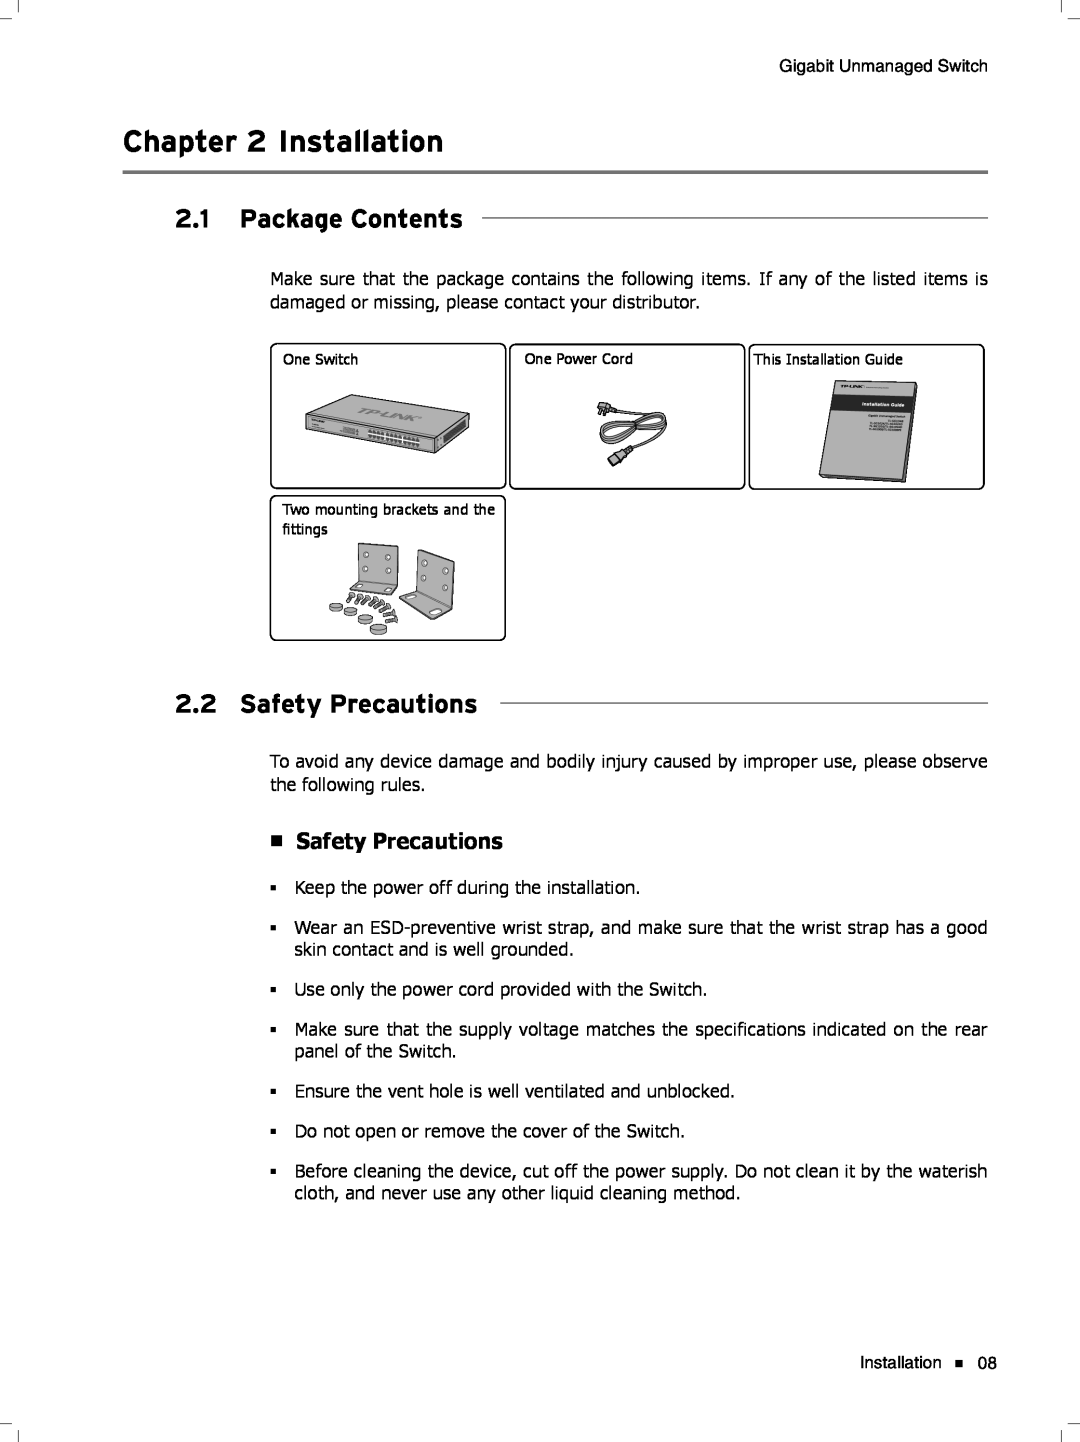 TP-Link tl-sg1048 manual CCCCCCCCCCInstallation, Package Contents, Safety Precautions 